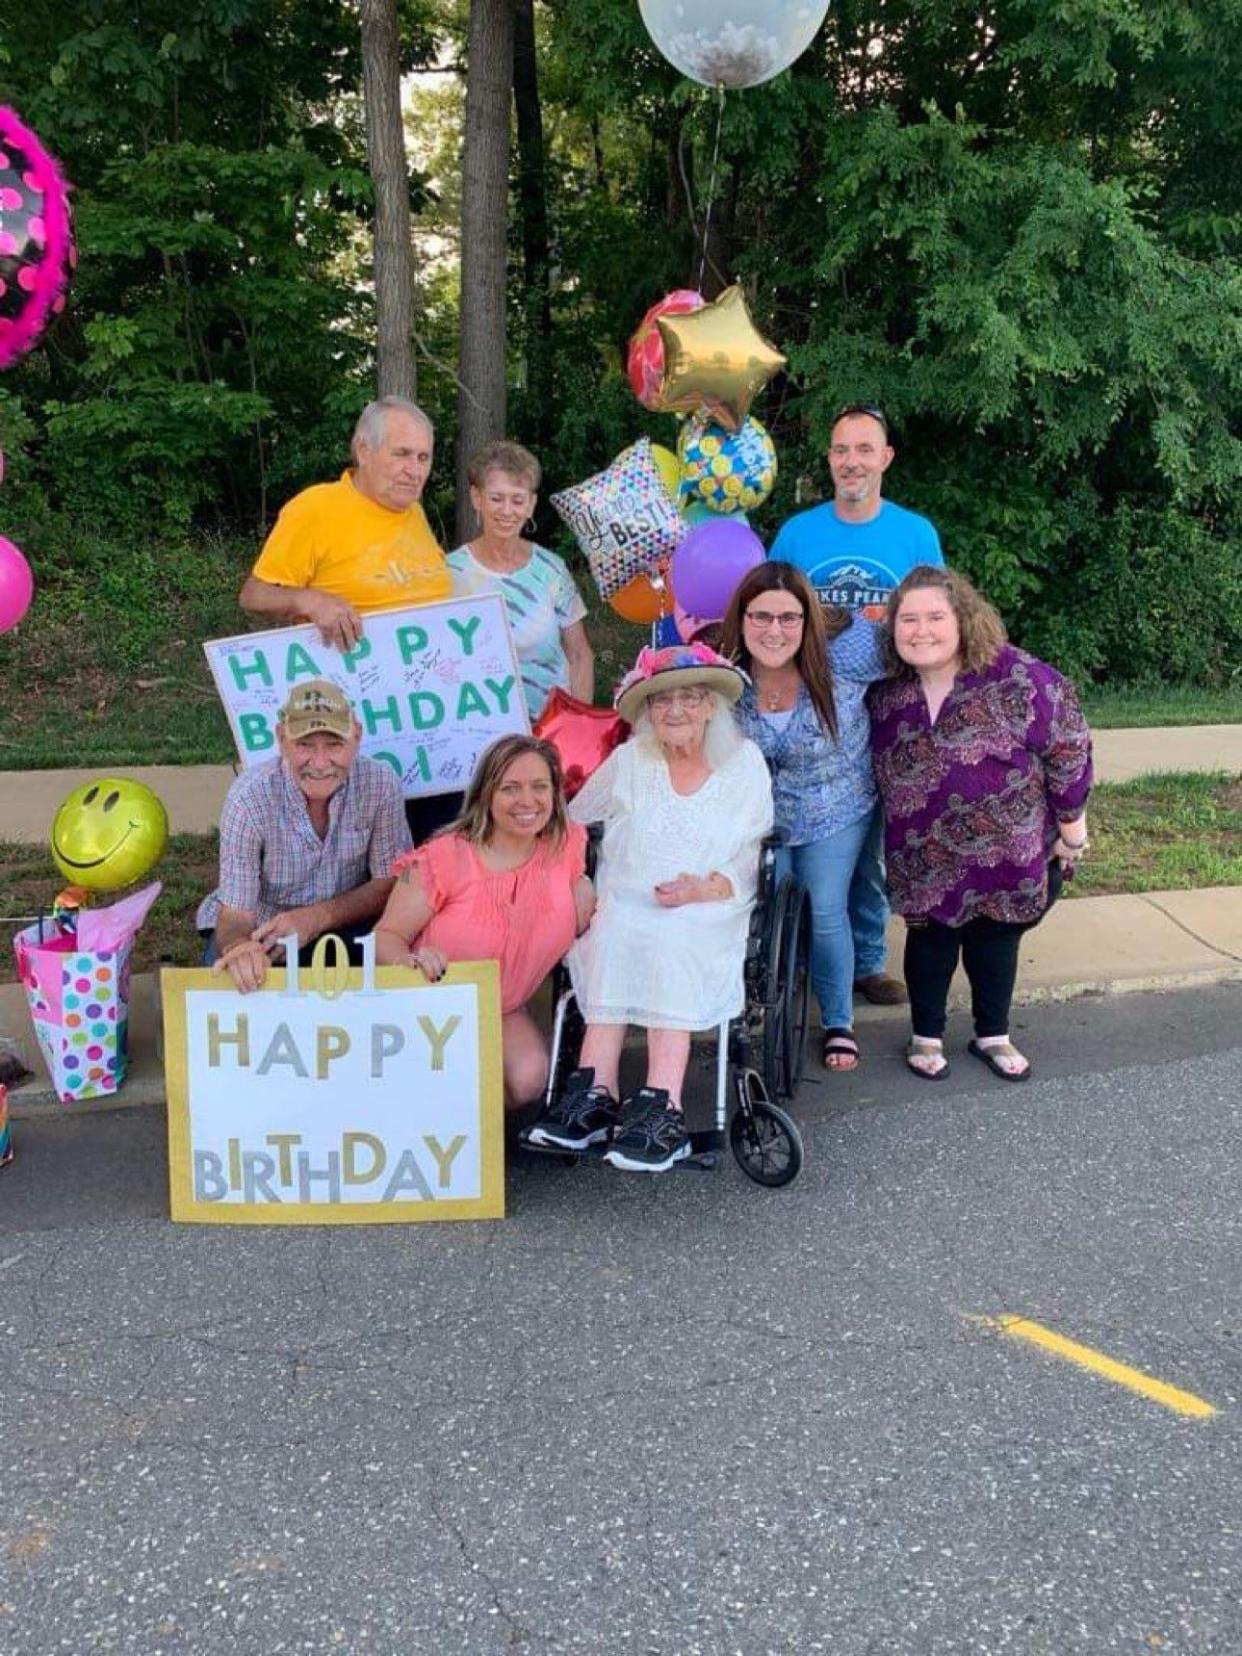 Bonnie Beatty will soon celebrate her 104th birthday with her family.